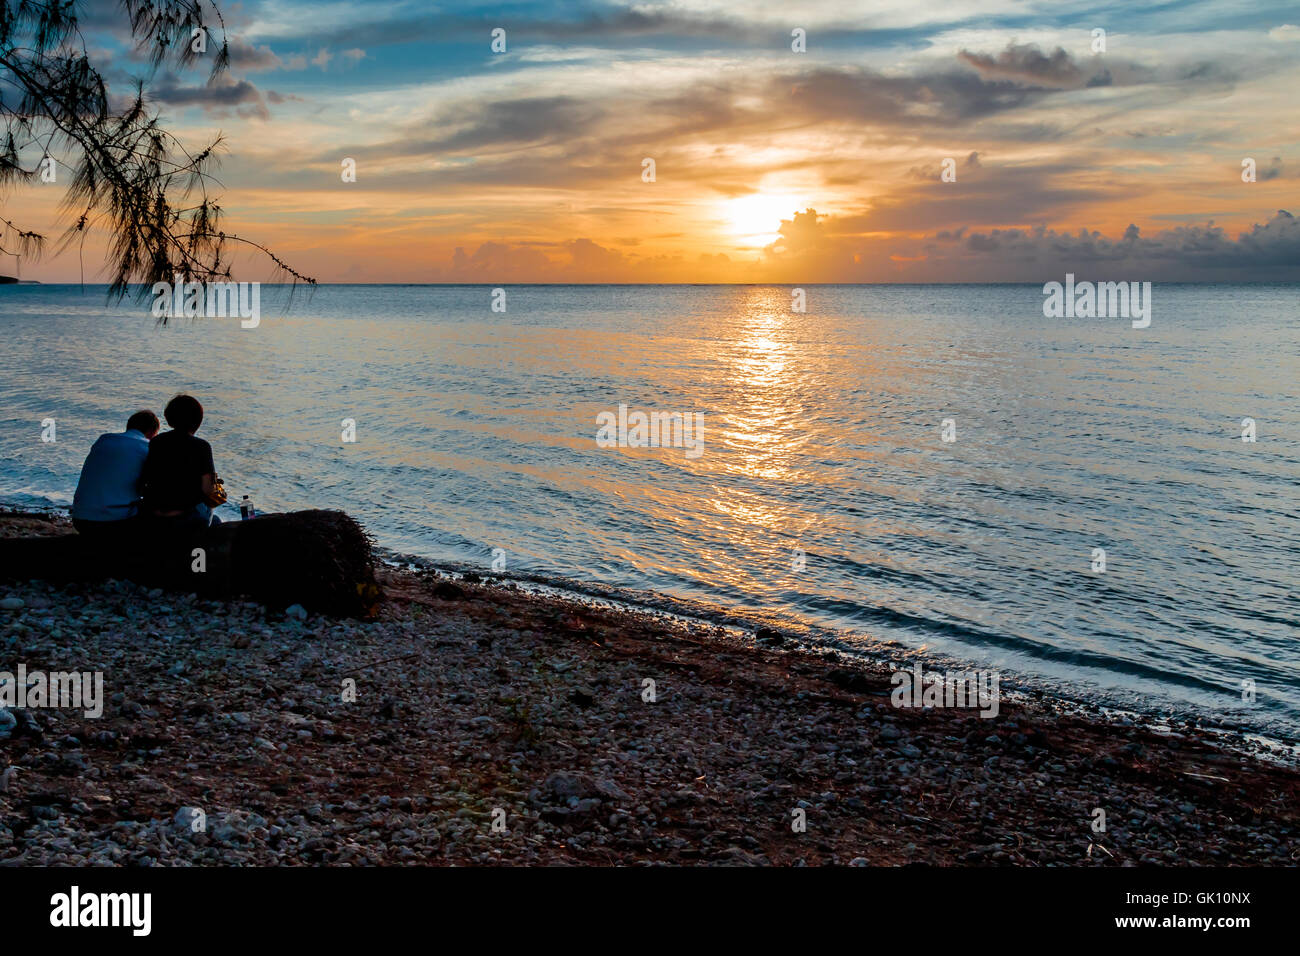 A couple in silhoutte sitting on a log under a tree enjoying the tropical sunset on the beach. Stock Photo